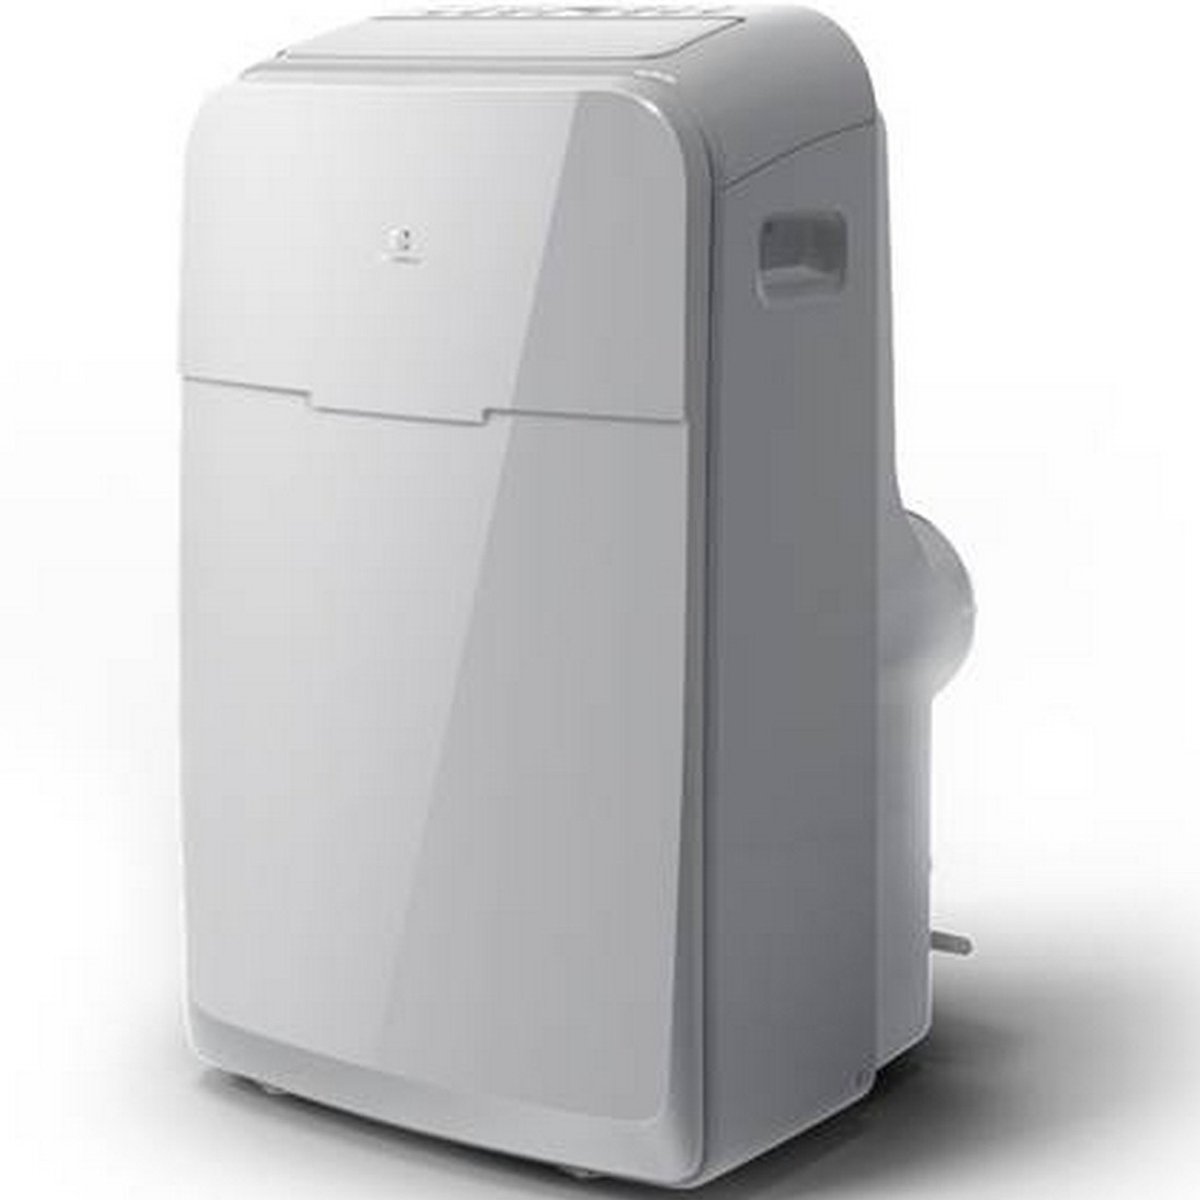 Electrolux Portable Air Conditioner EXP12H1NW6 1Ton